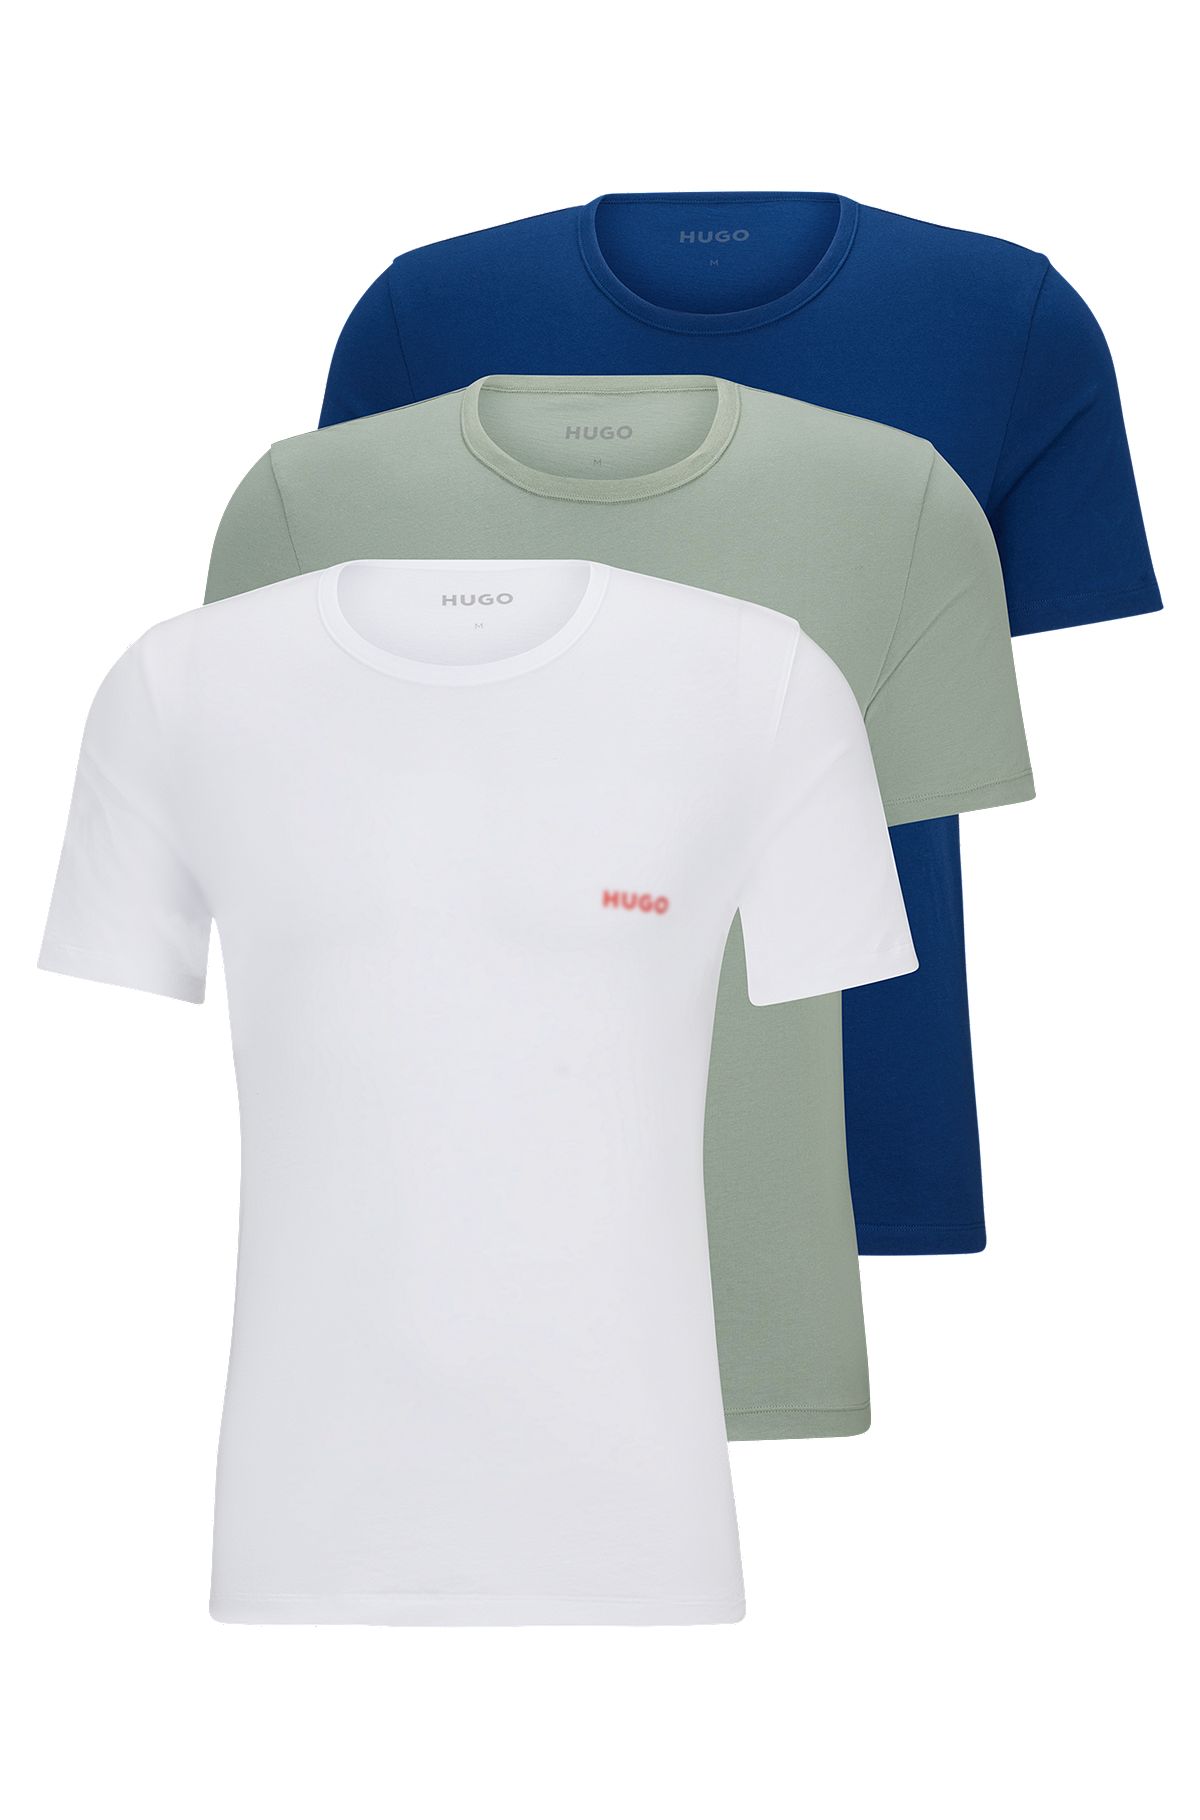 of print - Triple-pack HUGO T-shirts logo with cotton underwear